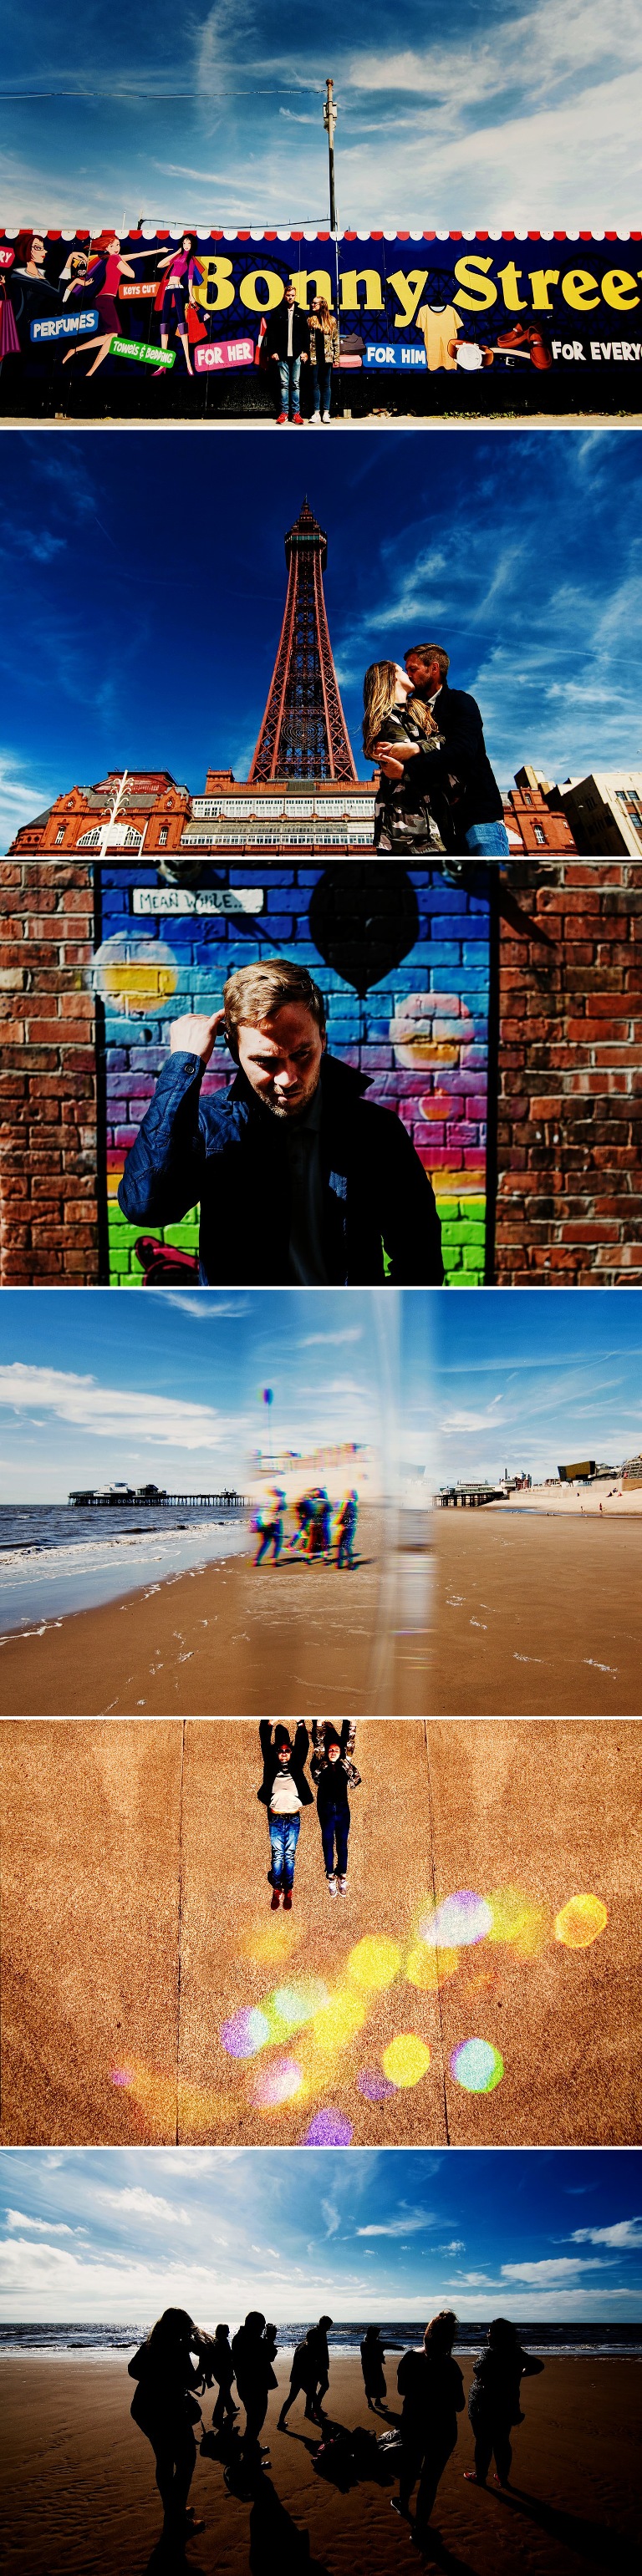 Level Up Photography session workshops for beginners in Blackpool